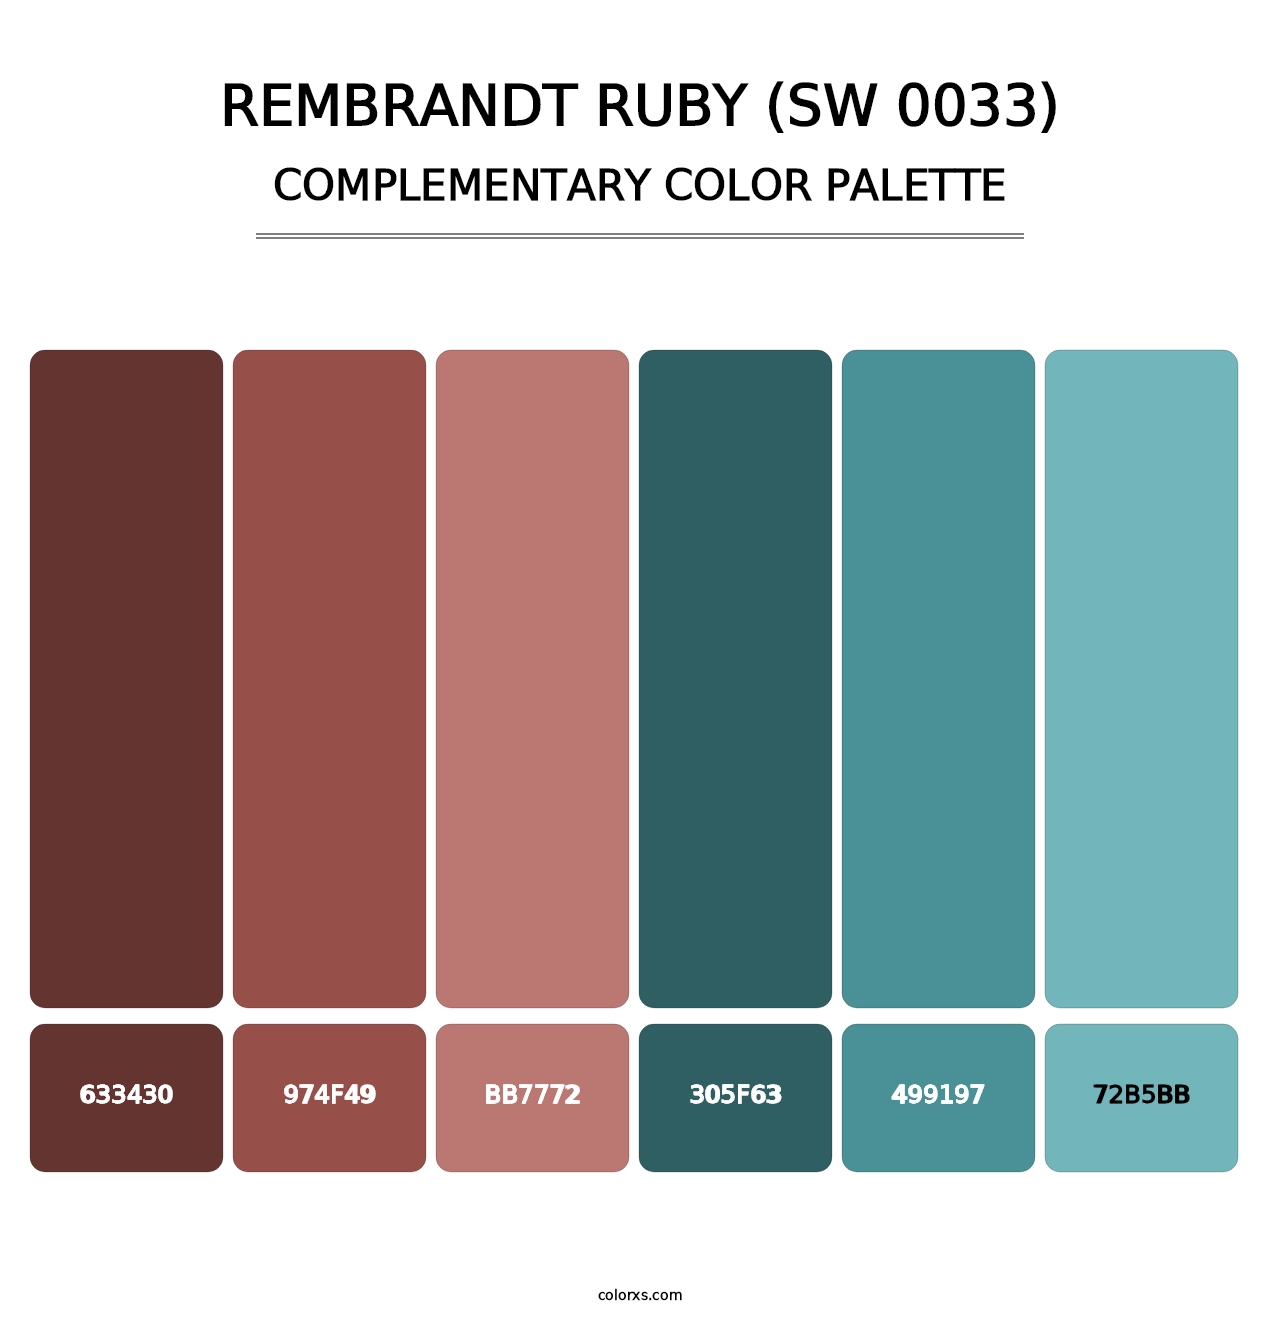 Rembrandt Ruby (SW 0033) - Complementary Color Palette